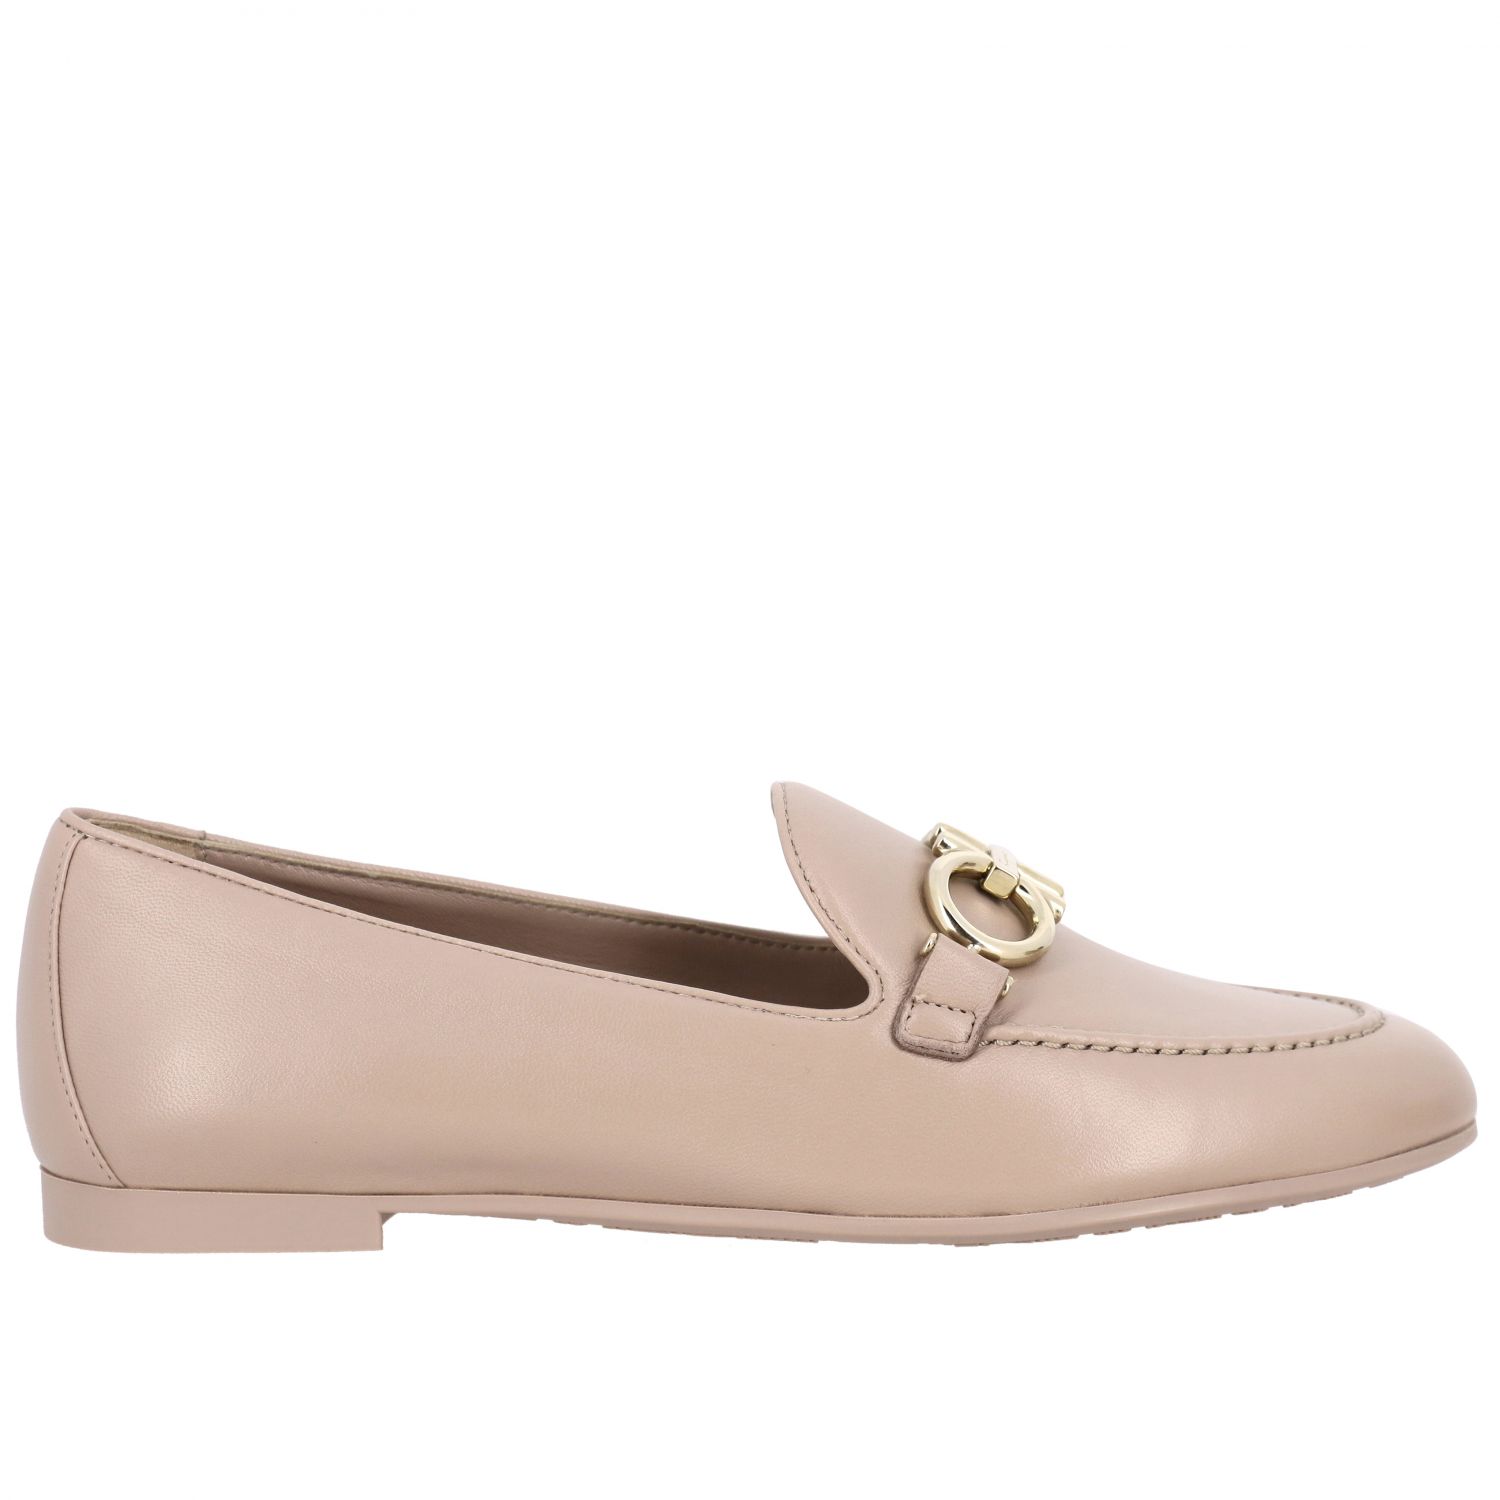 nude loafer shoes